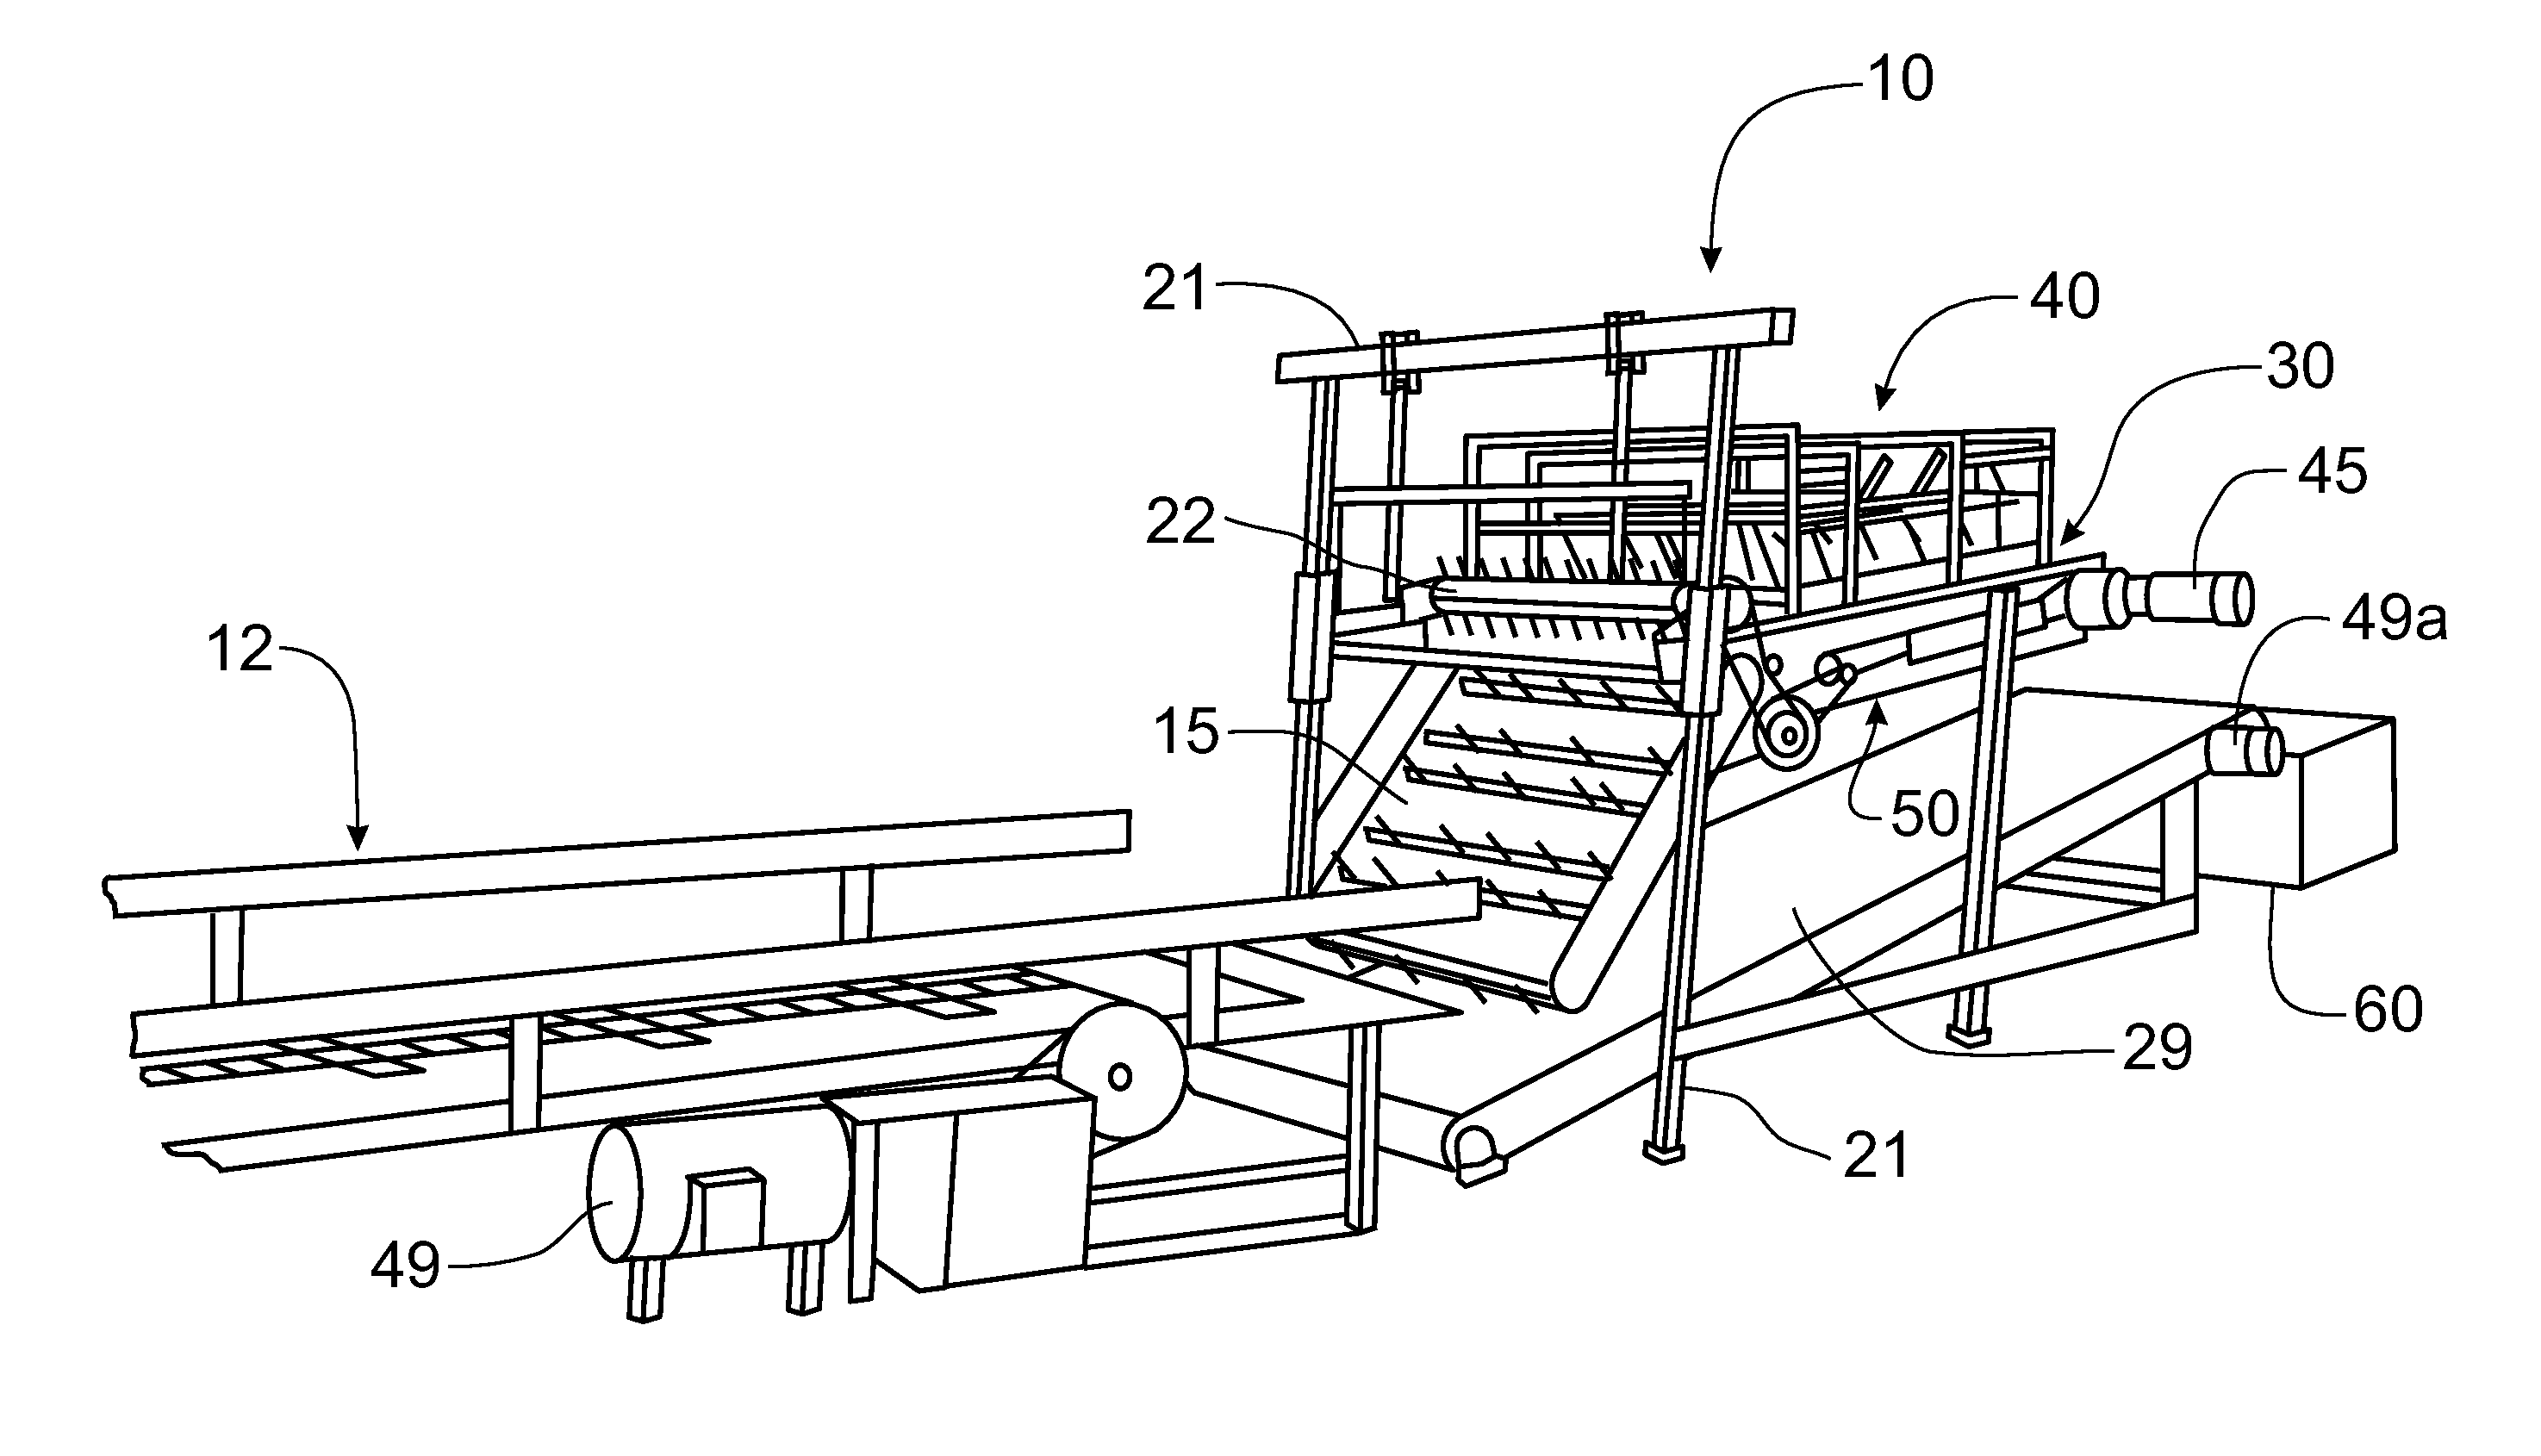 Apparatus for Converting Large Bales of Forage Material into Small Rectangular Bales of Forage Material